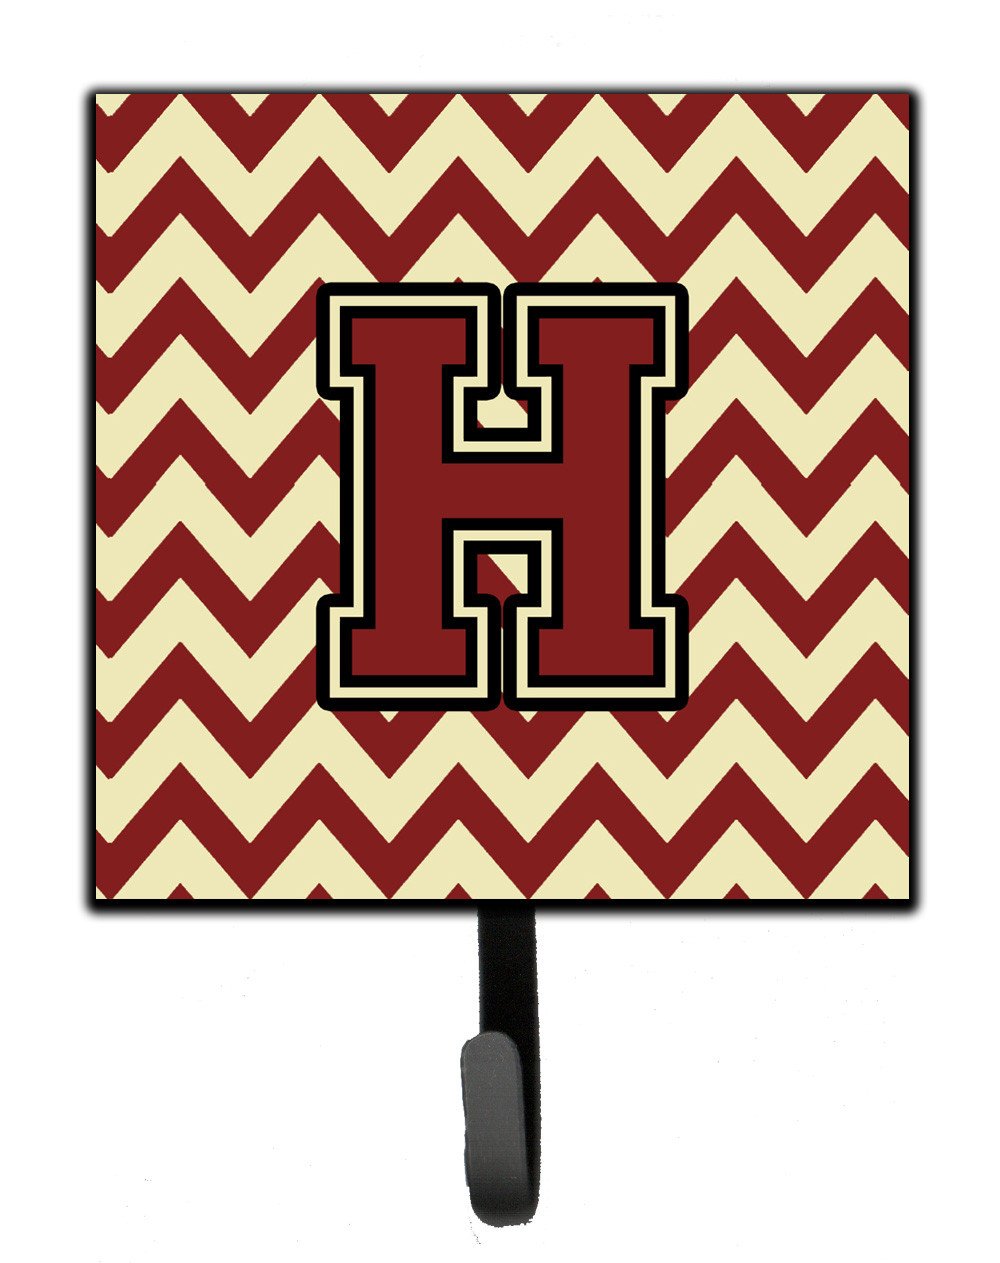 Letter H Chevron Maroon and Gold Leash or Key Holder CJ1061-HSH4 by Caroline's Treasures